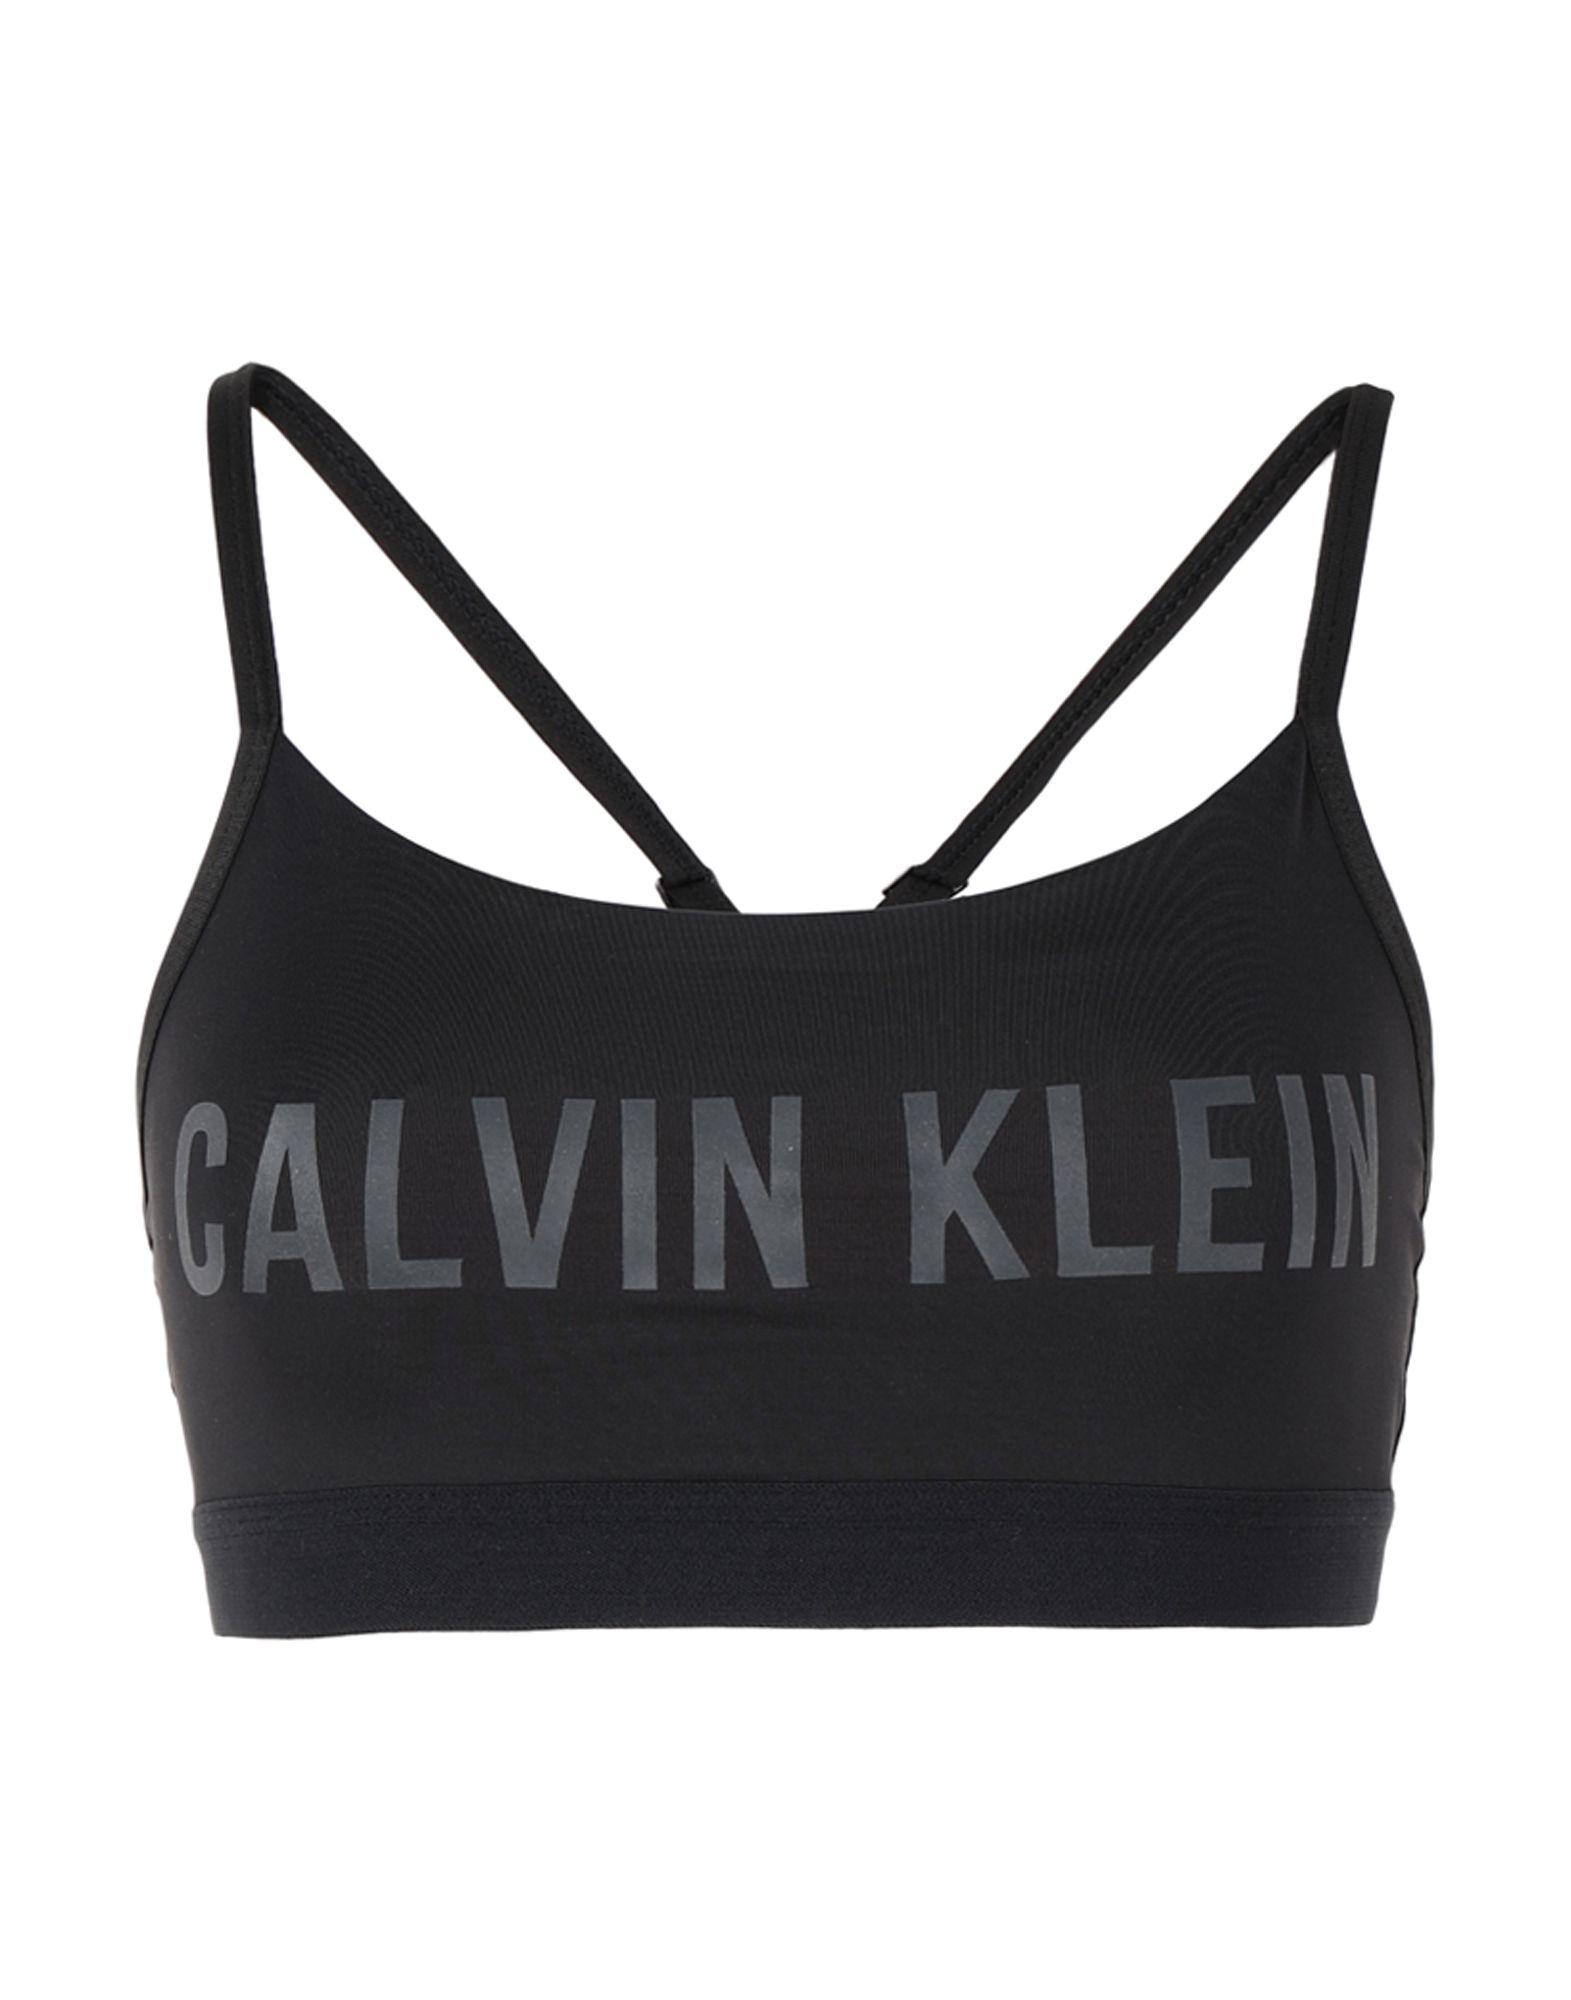 Calvin Klein Synthetic Top in Black - Lyst